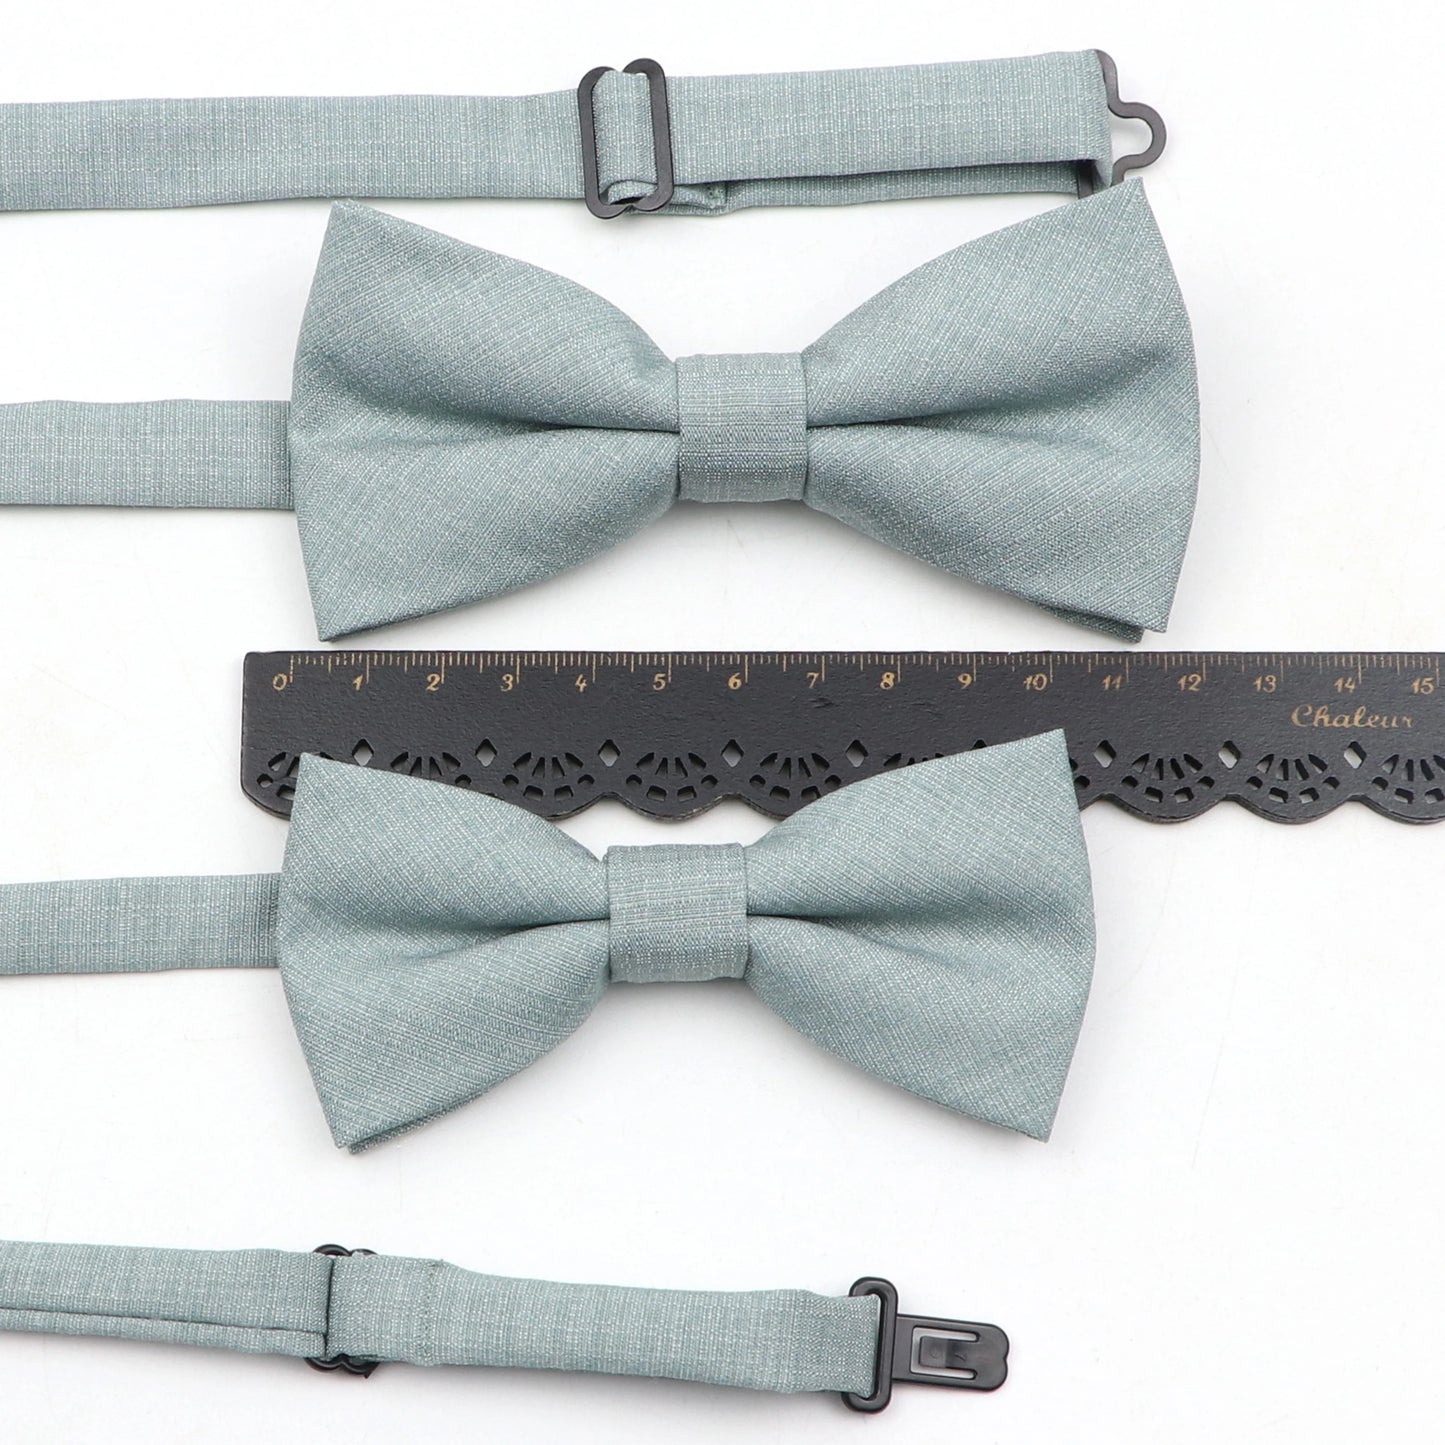 Soft Polyester Solid Bowtie Set in 15 Colors: Father-Son Matching Butterfly Bow Ties for Casual Wear, Weddings, and Special Occasions